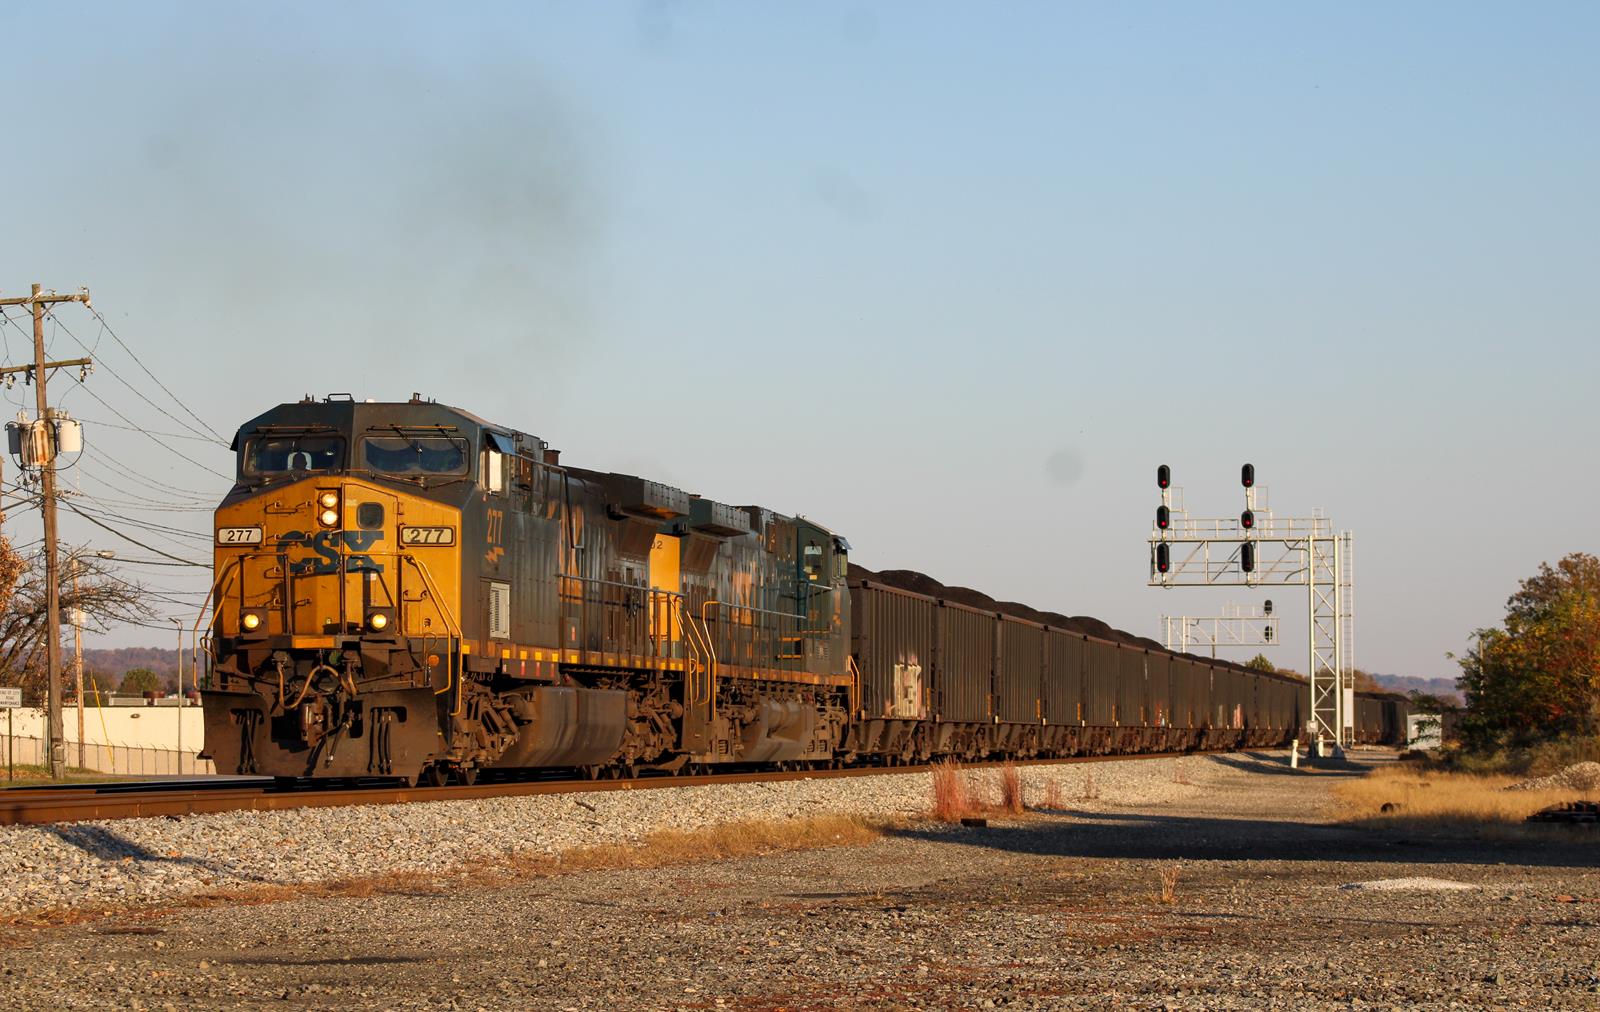 CSX 277 is a class GE AC4400CW and  is pictured in St Albans, West Virginia, United States.  This was taken along the Kanawah Subdivision on the CSX Transportation. Photo Copyright: Chris Hall uploaded to Railroad Gallery on 12/05/2022. This photograph of CSX 277 was taken on Saturday, October 22, 2022. All Rights Reserved. 